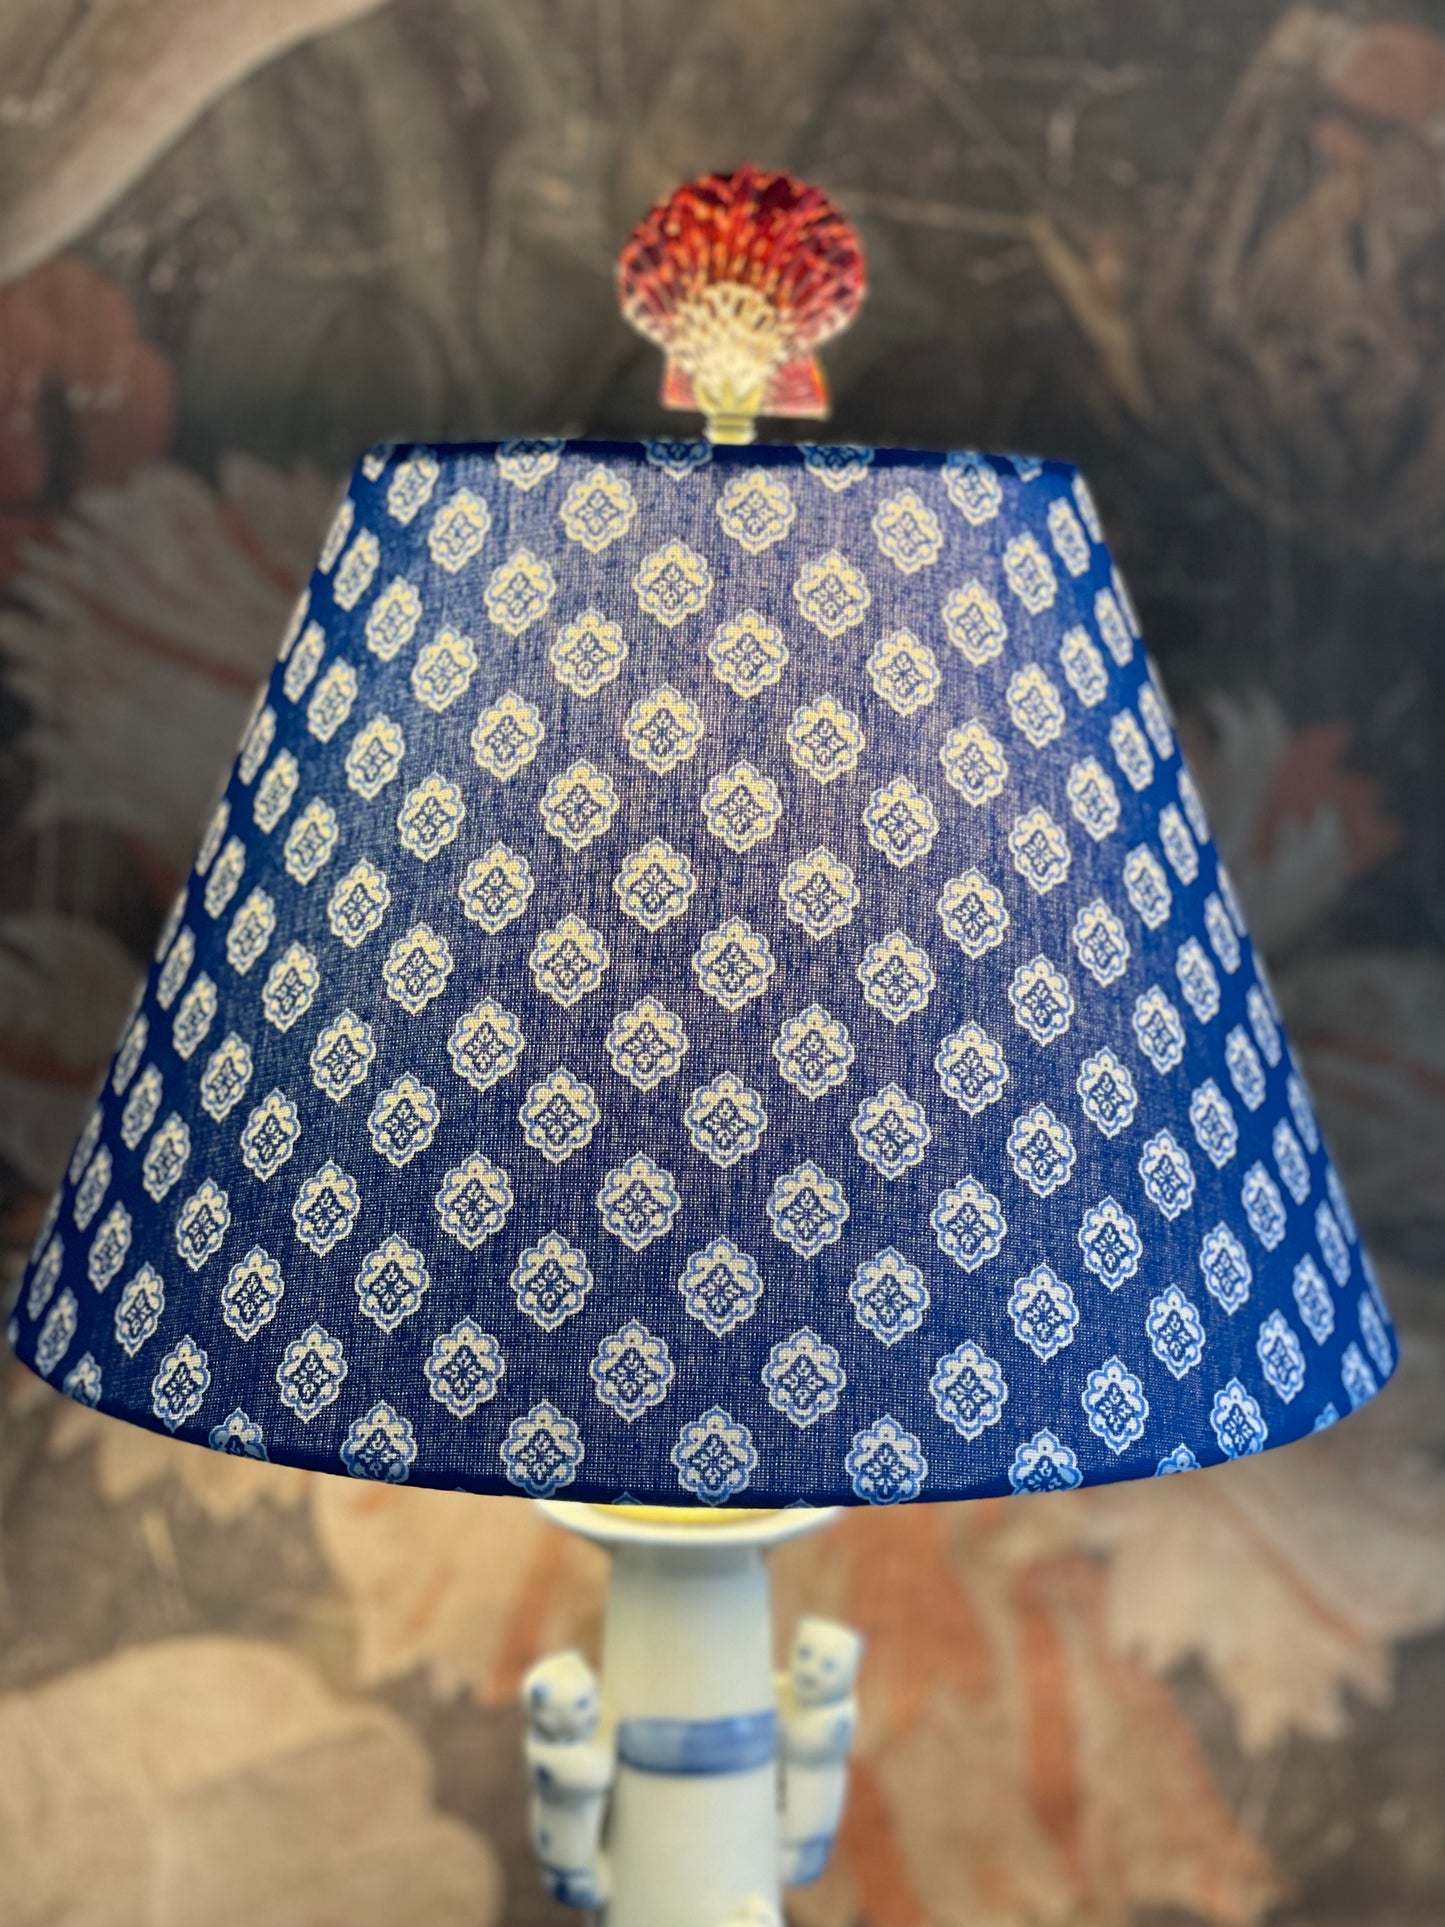 Small Conical Lampshade. French Jacquard. "Antibes" Blue and White.